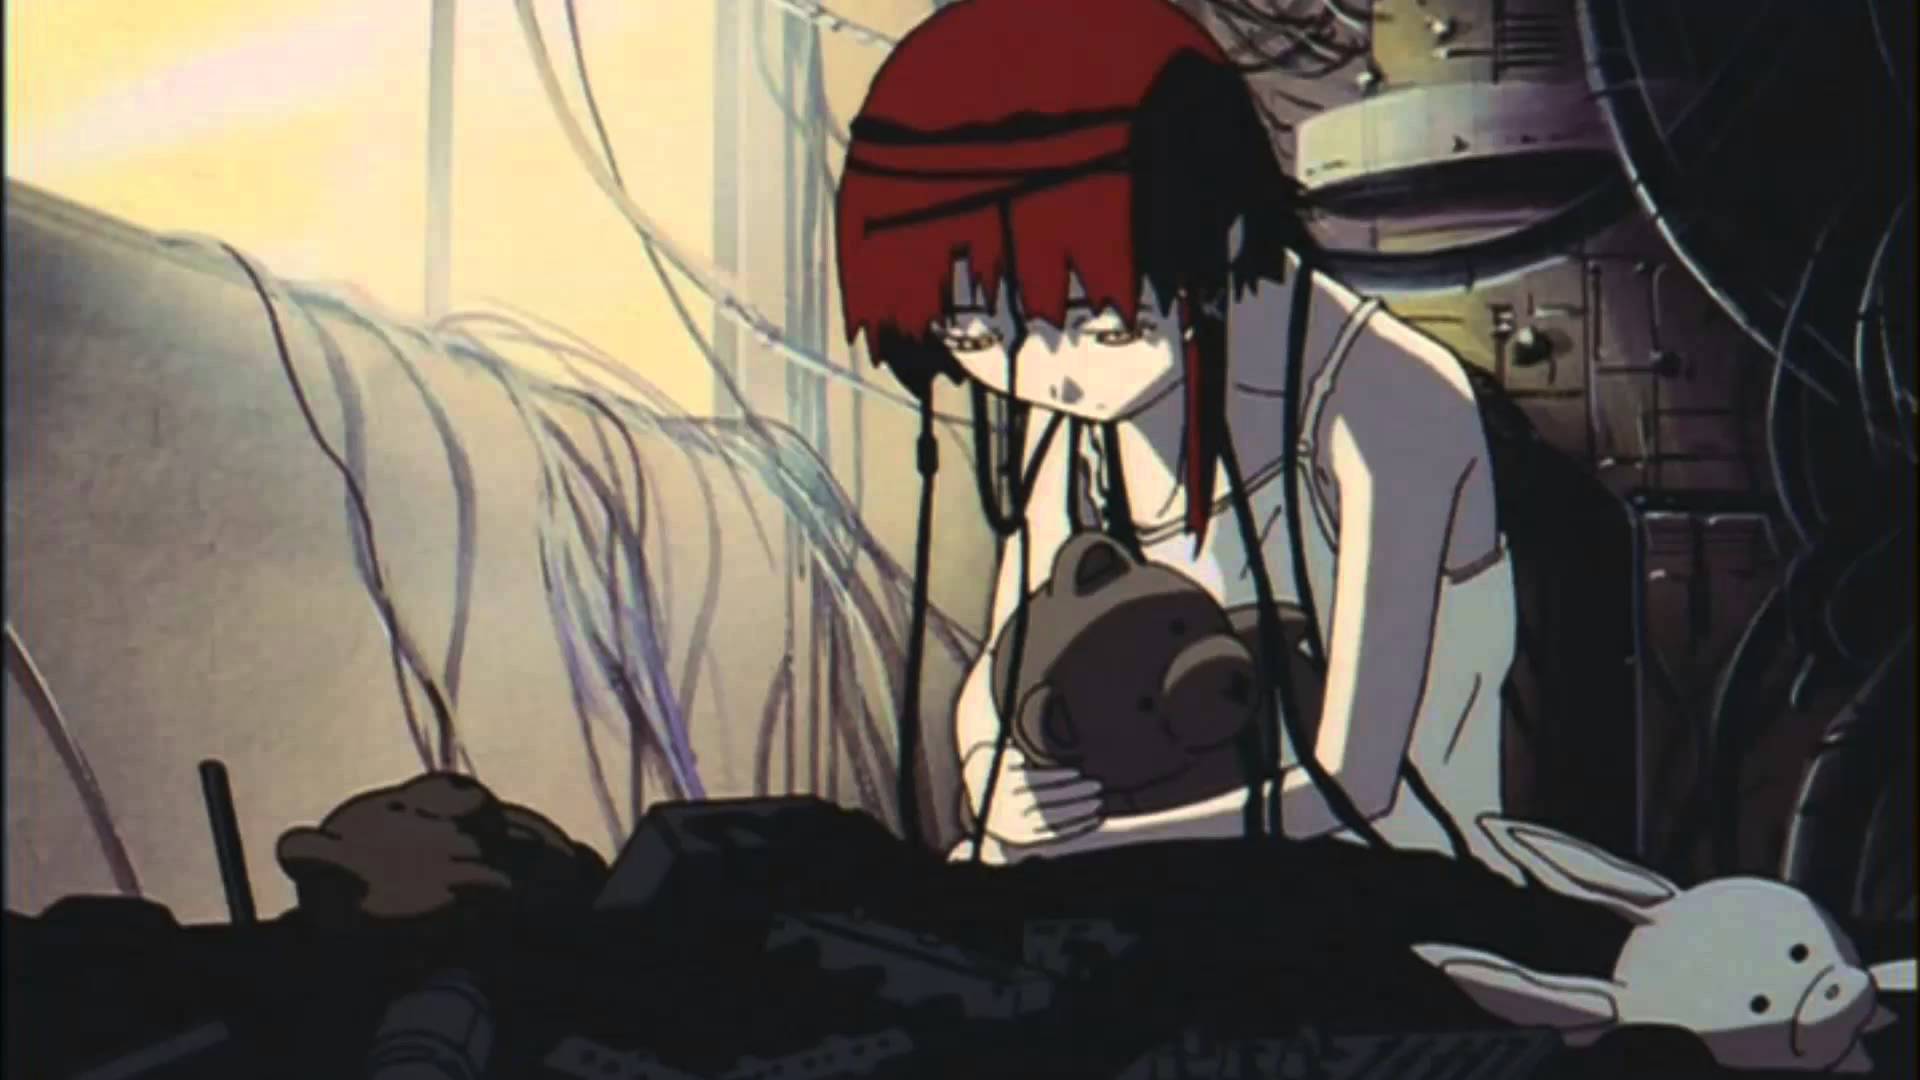 The Unconscious Connections of Man in Serial Experiments Lain